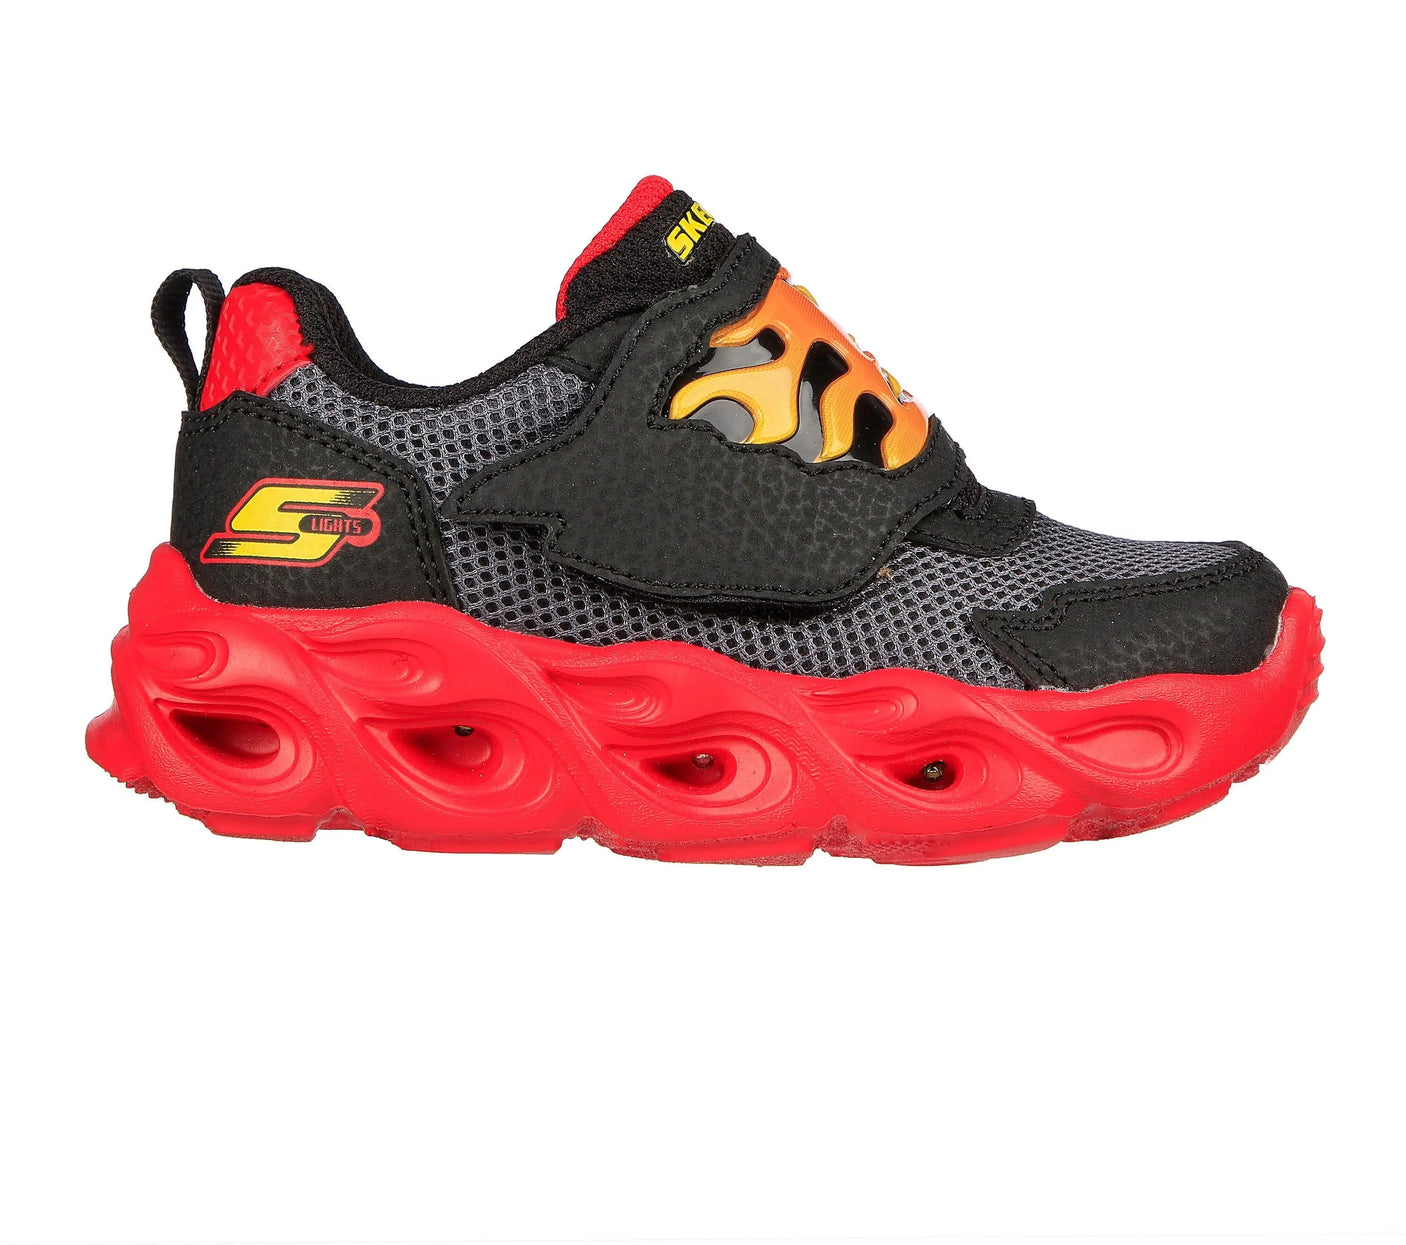 Toddler Boys' S Lights: Thermo Flash - Flame Flow | Skechers - Skechers